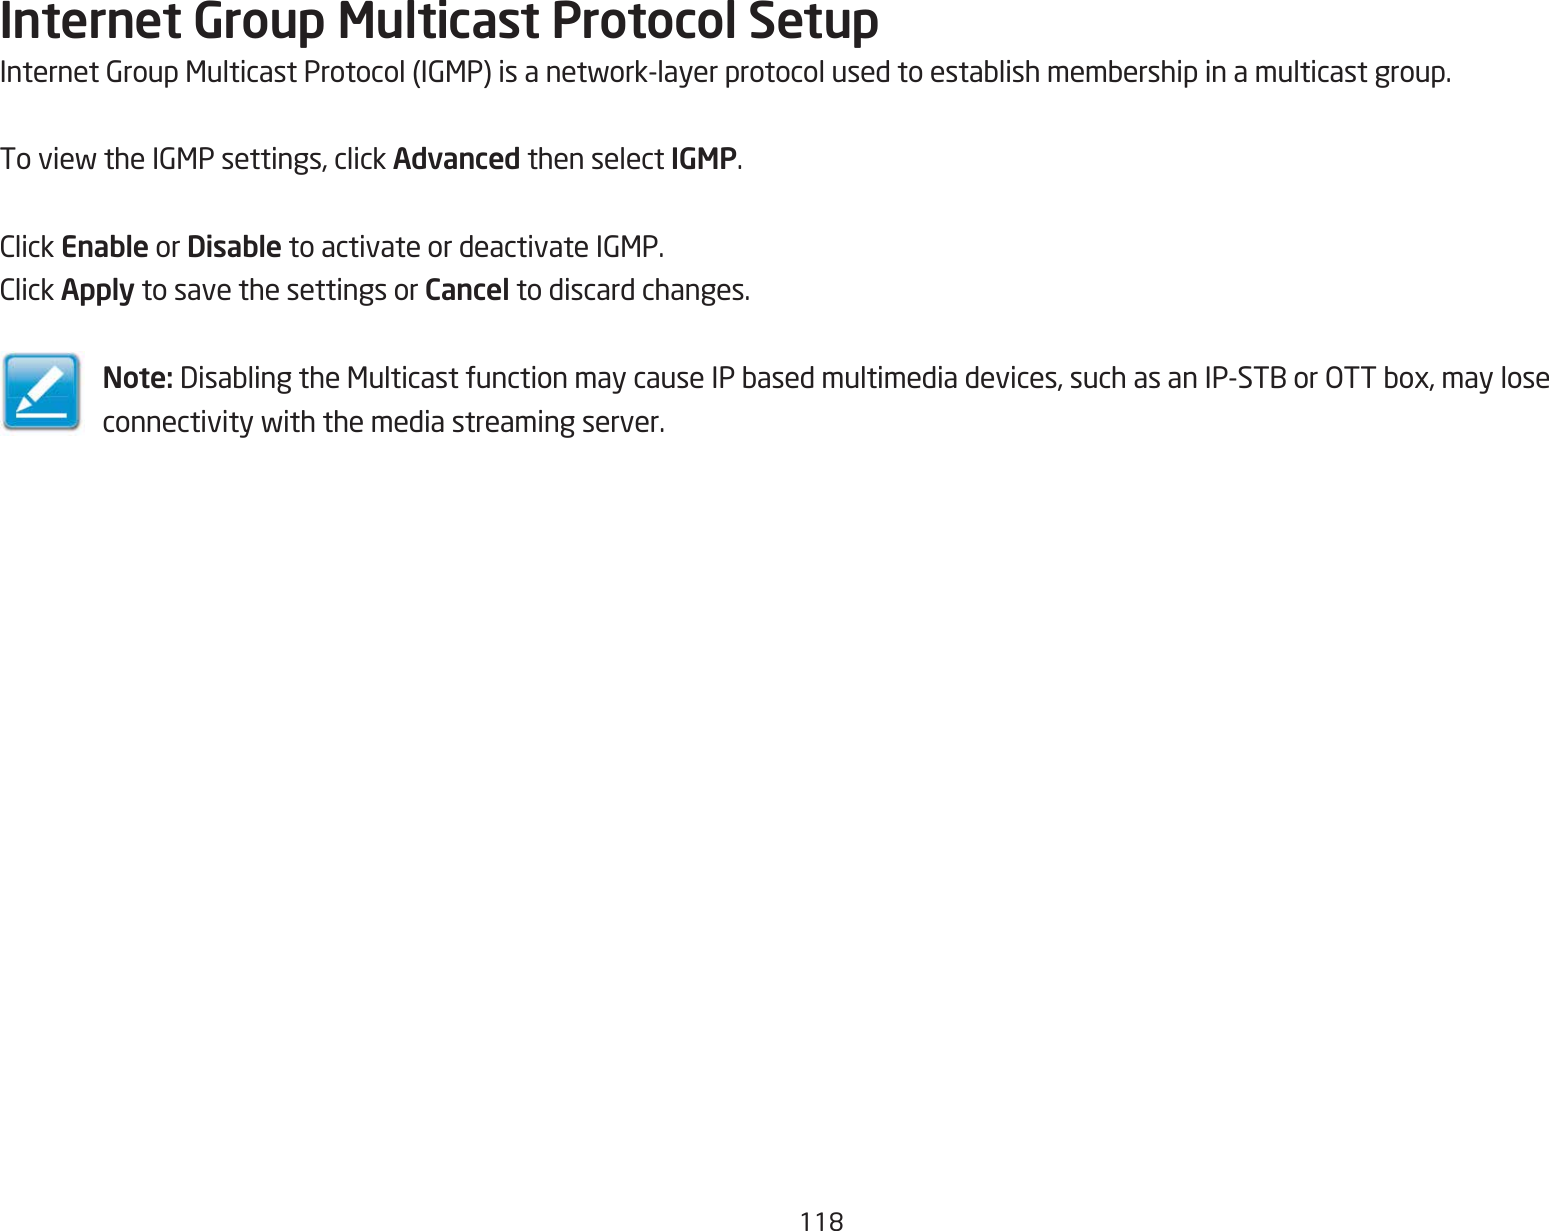 118Internet Group Multicast Protocol SetupInternetGroupMulticastProtocol(IGMP)isanetwork-layerprotocolusedtoestablishmembershipinamulticastgroup.ToviewtheIGMPsettings,clickAdvanced then select IGMP.ClickEnable or Disable toactivateordeactivateIGMP.ClickApply to save the settings or Cancel to discard changes.Note: DisablingtheMulticastfunctionmaycauseIPbasedmultimediadevices,suchasanIP-STBorOTTbox,mayloseconnectivitywiththemediastreamingserver.